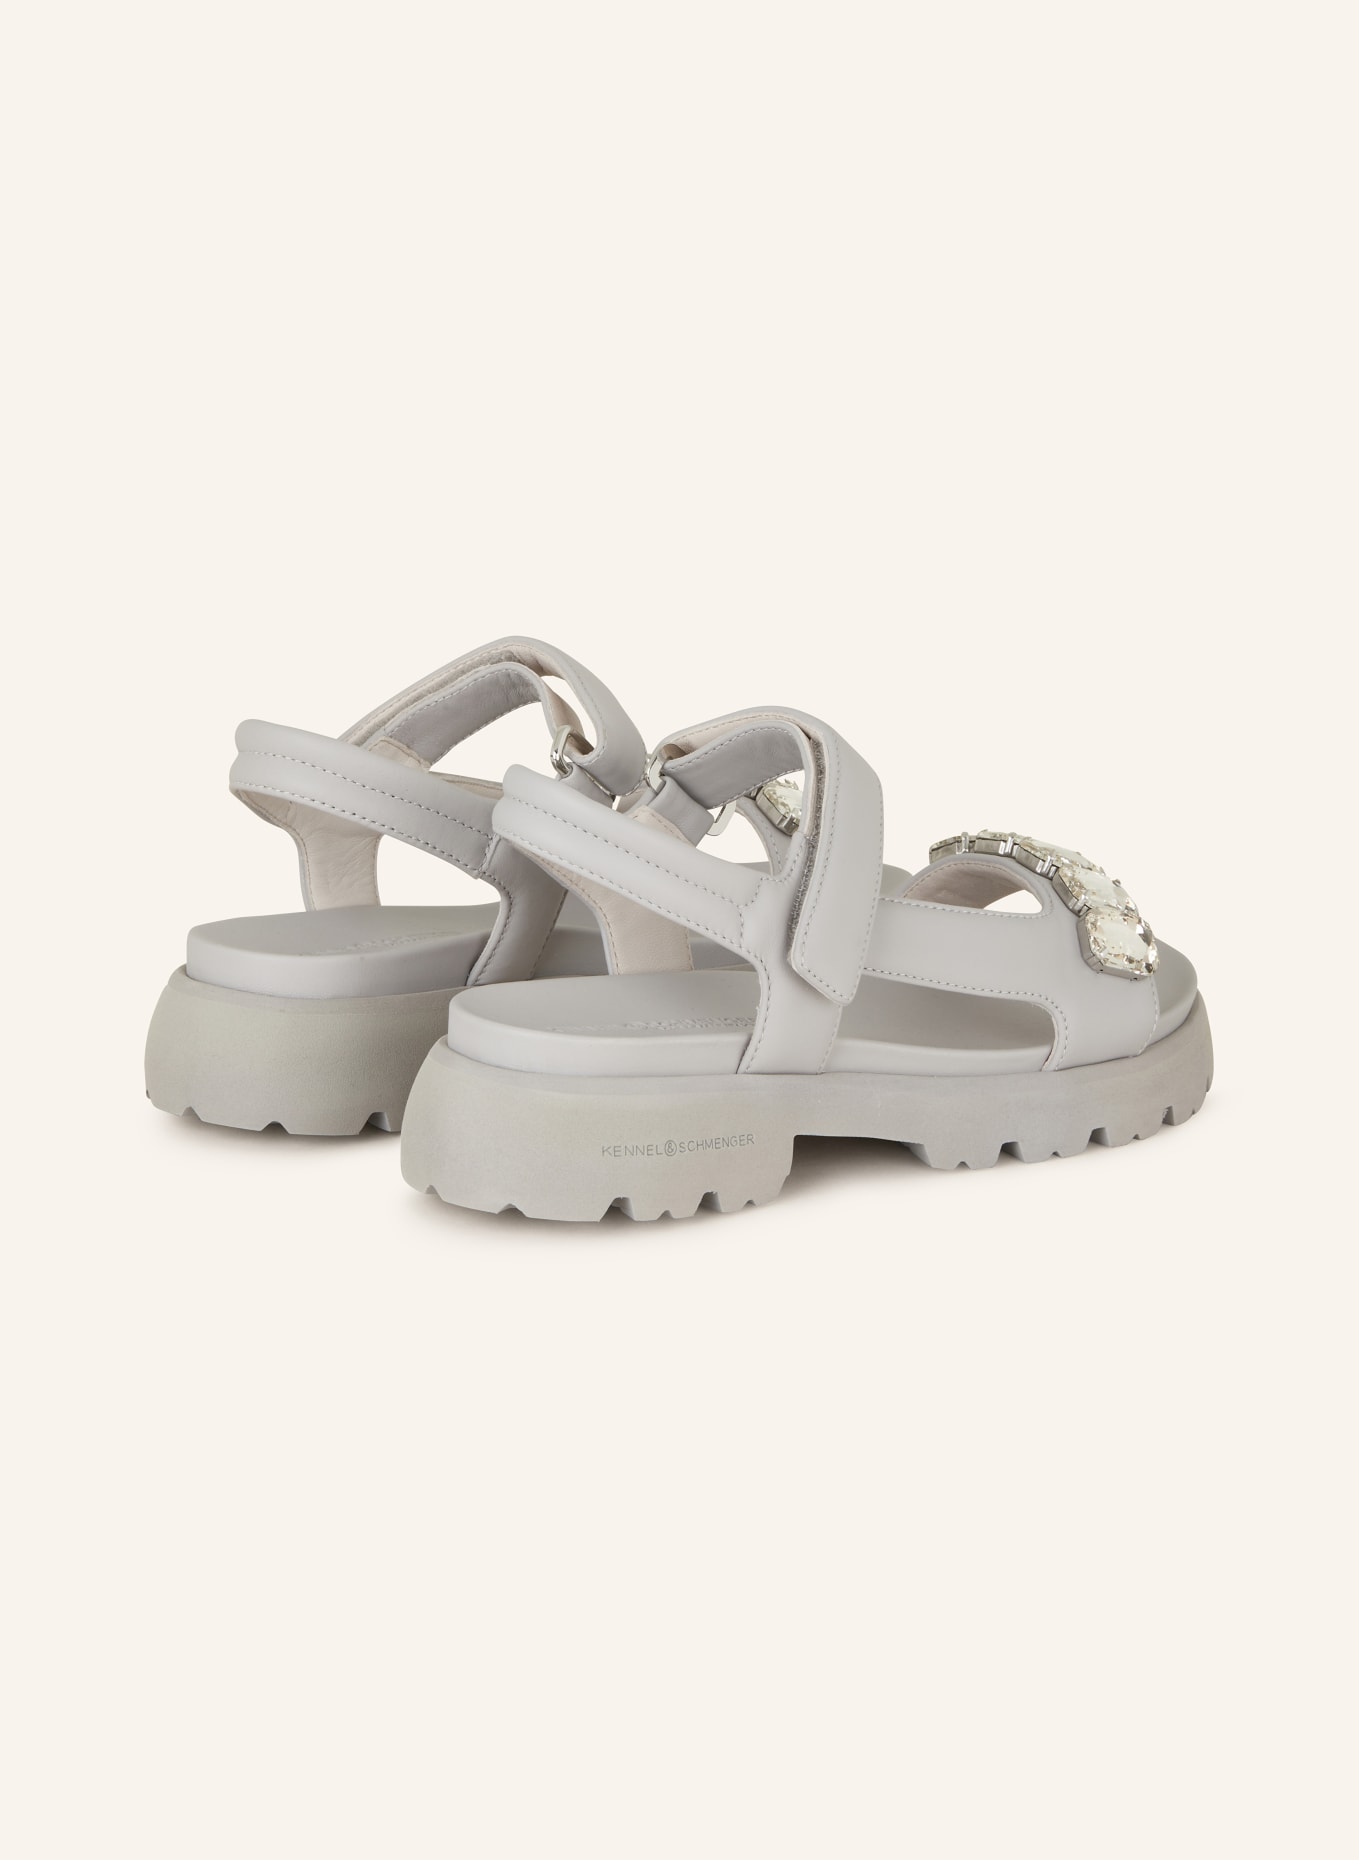 KENNEL & SCHMENGER Sandals SKILL with decorative gems, Color: GRAY (Image 2)